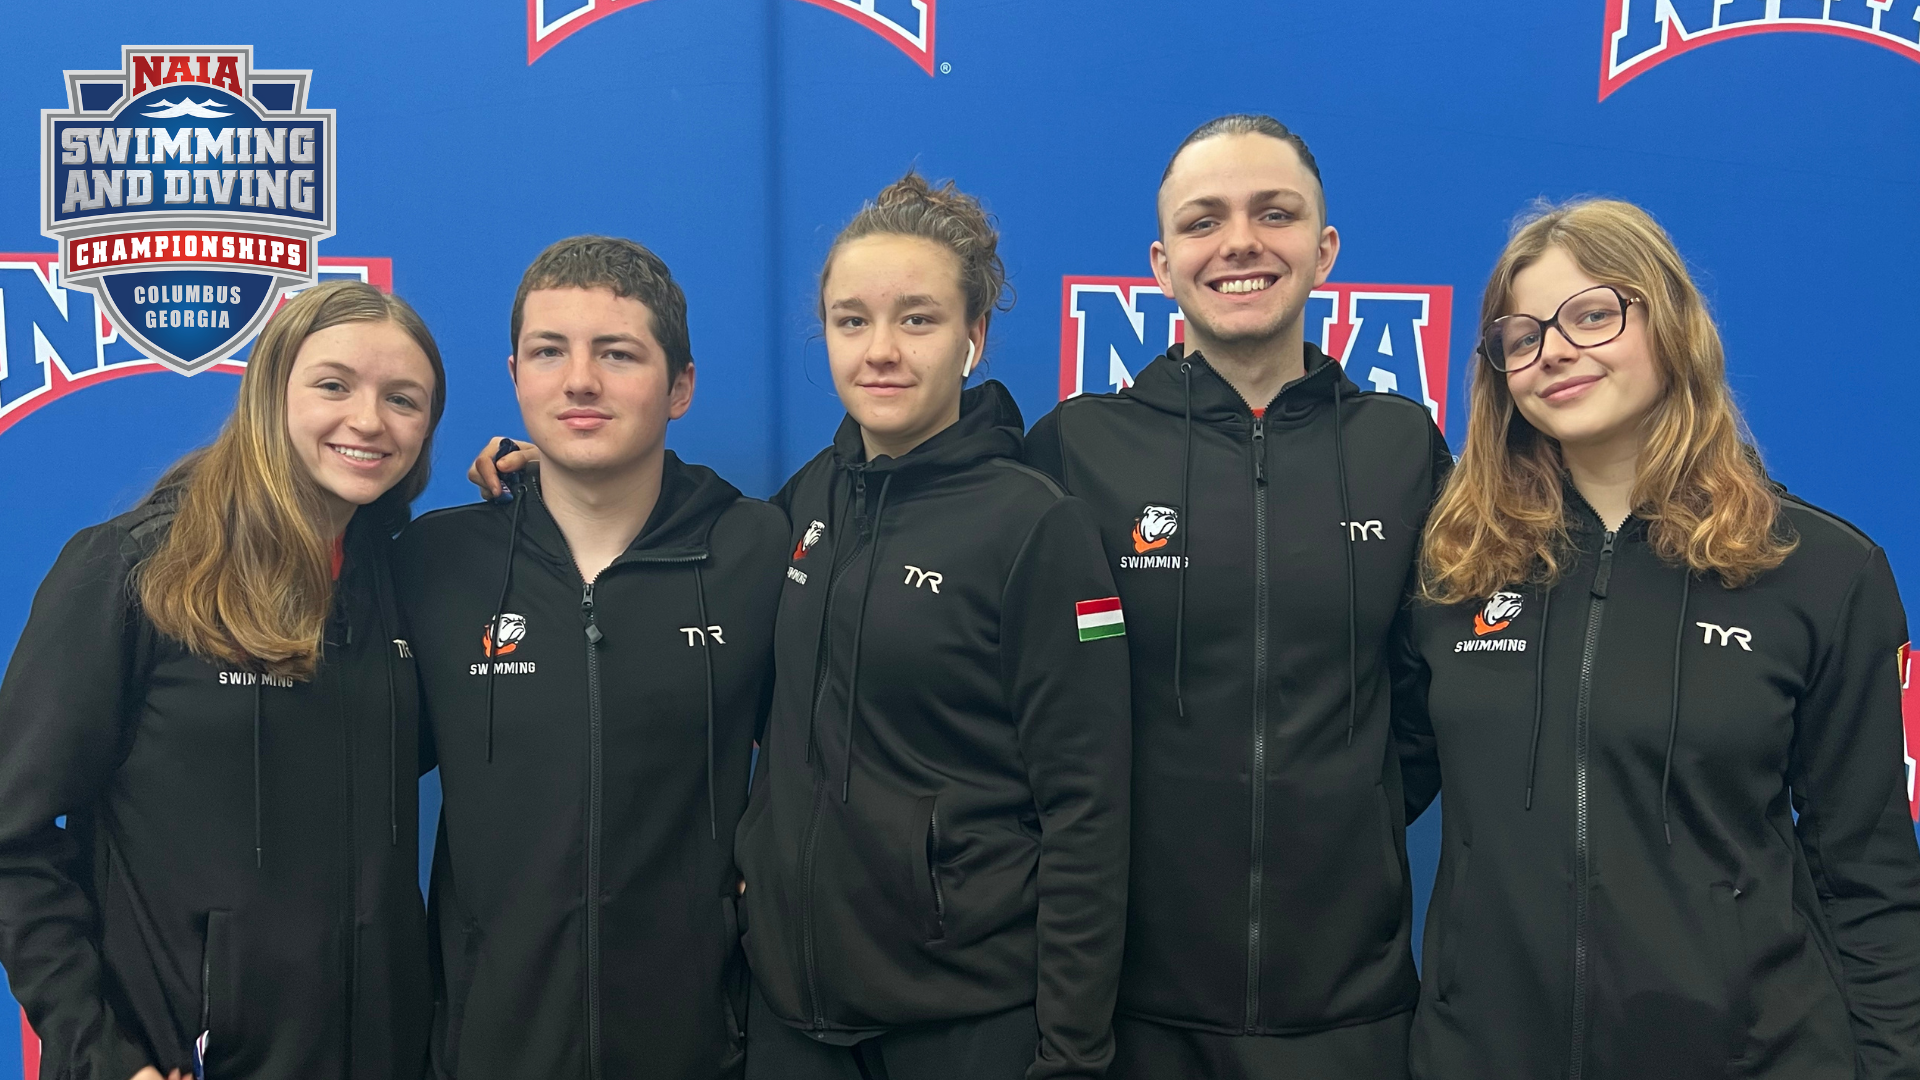 Union men's swimming and diving recap from the NAIA National Championship